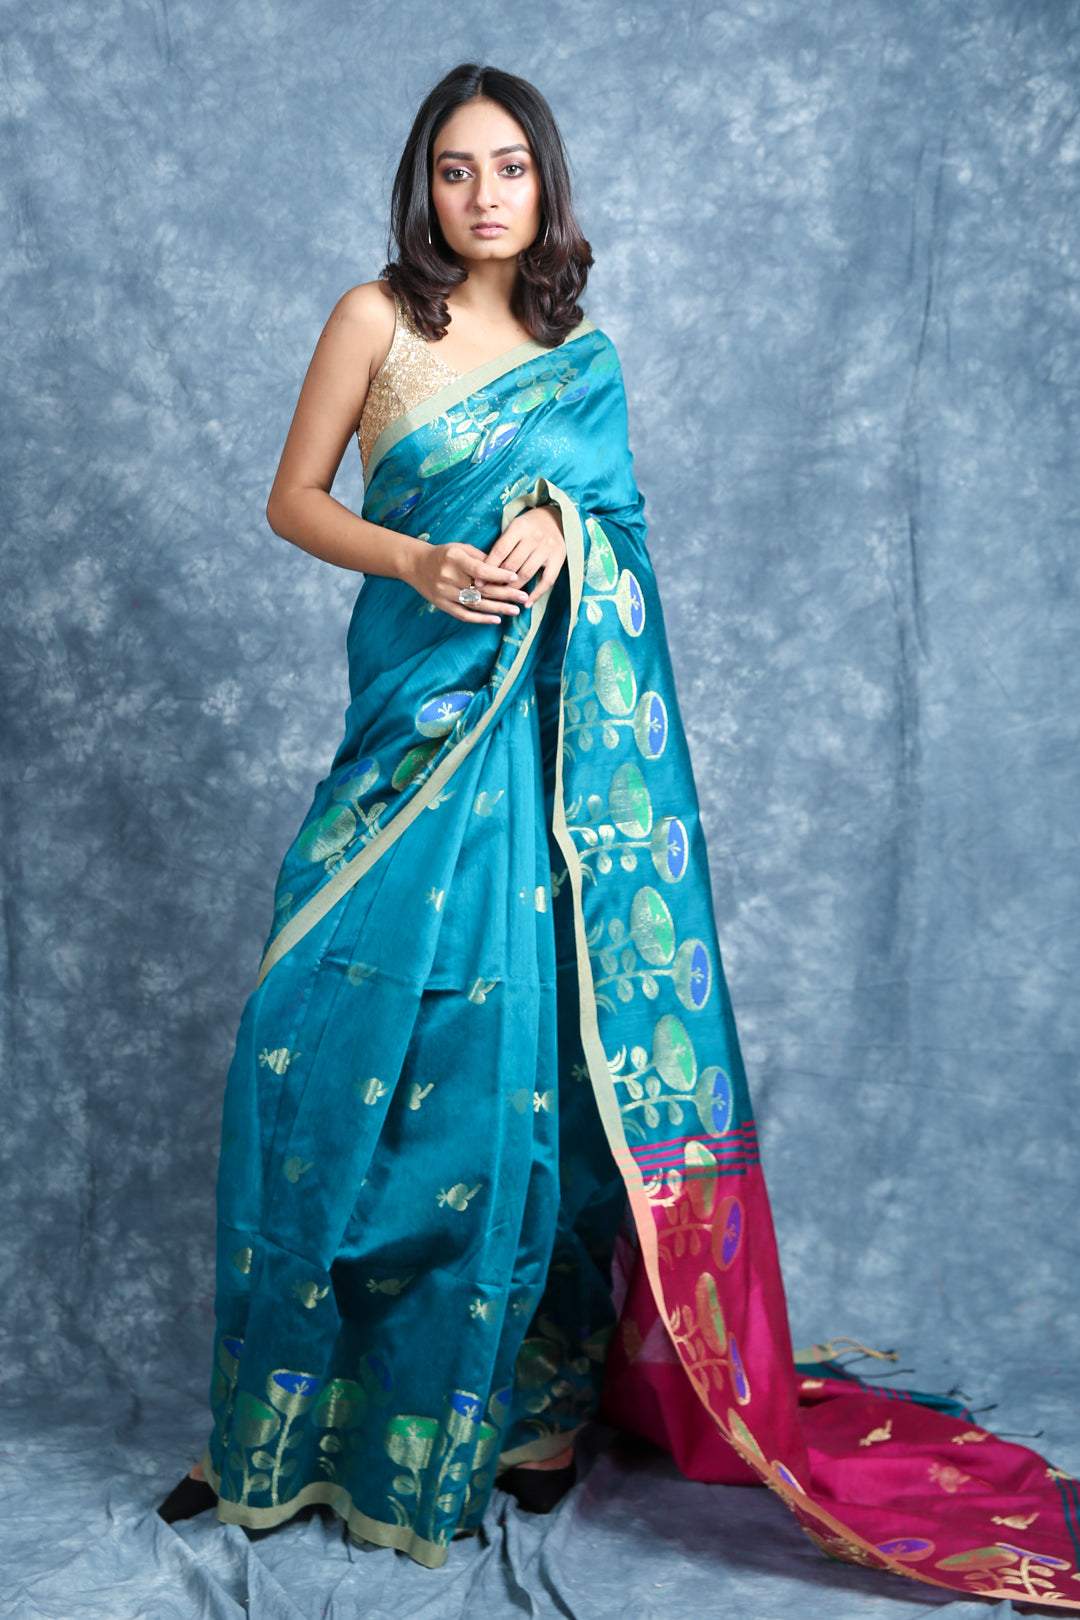 Teal Blended Cotton Handwoven Soft Saree With Flower Design Border